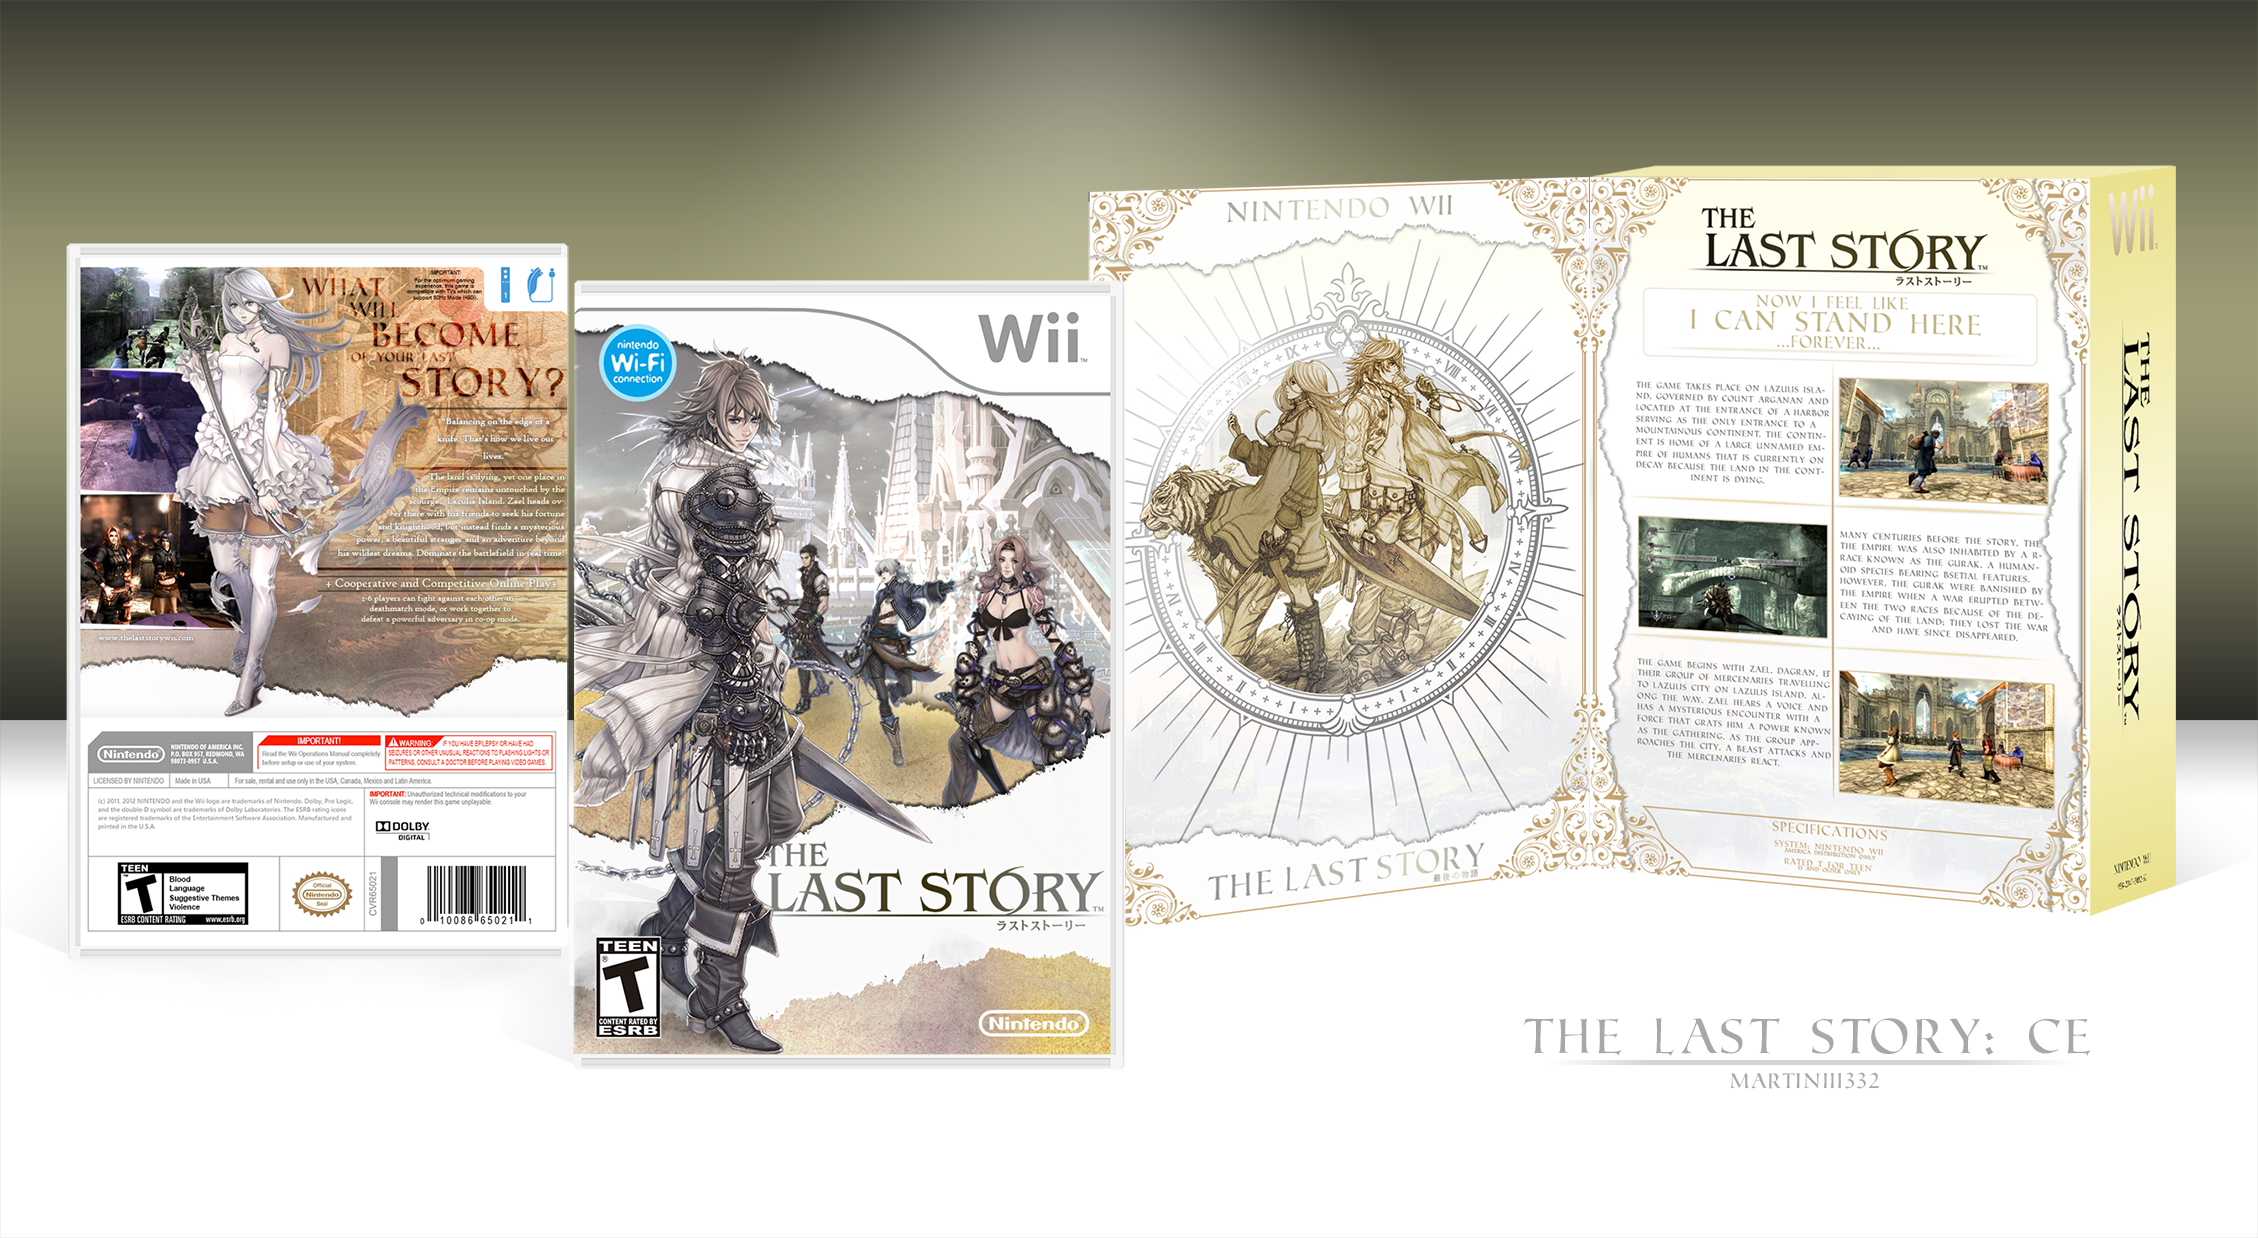 The Last Story box cover